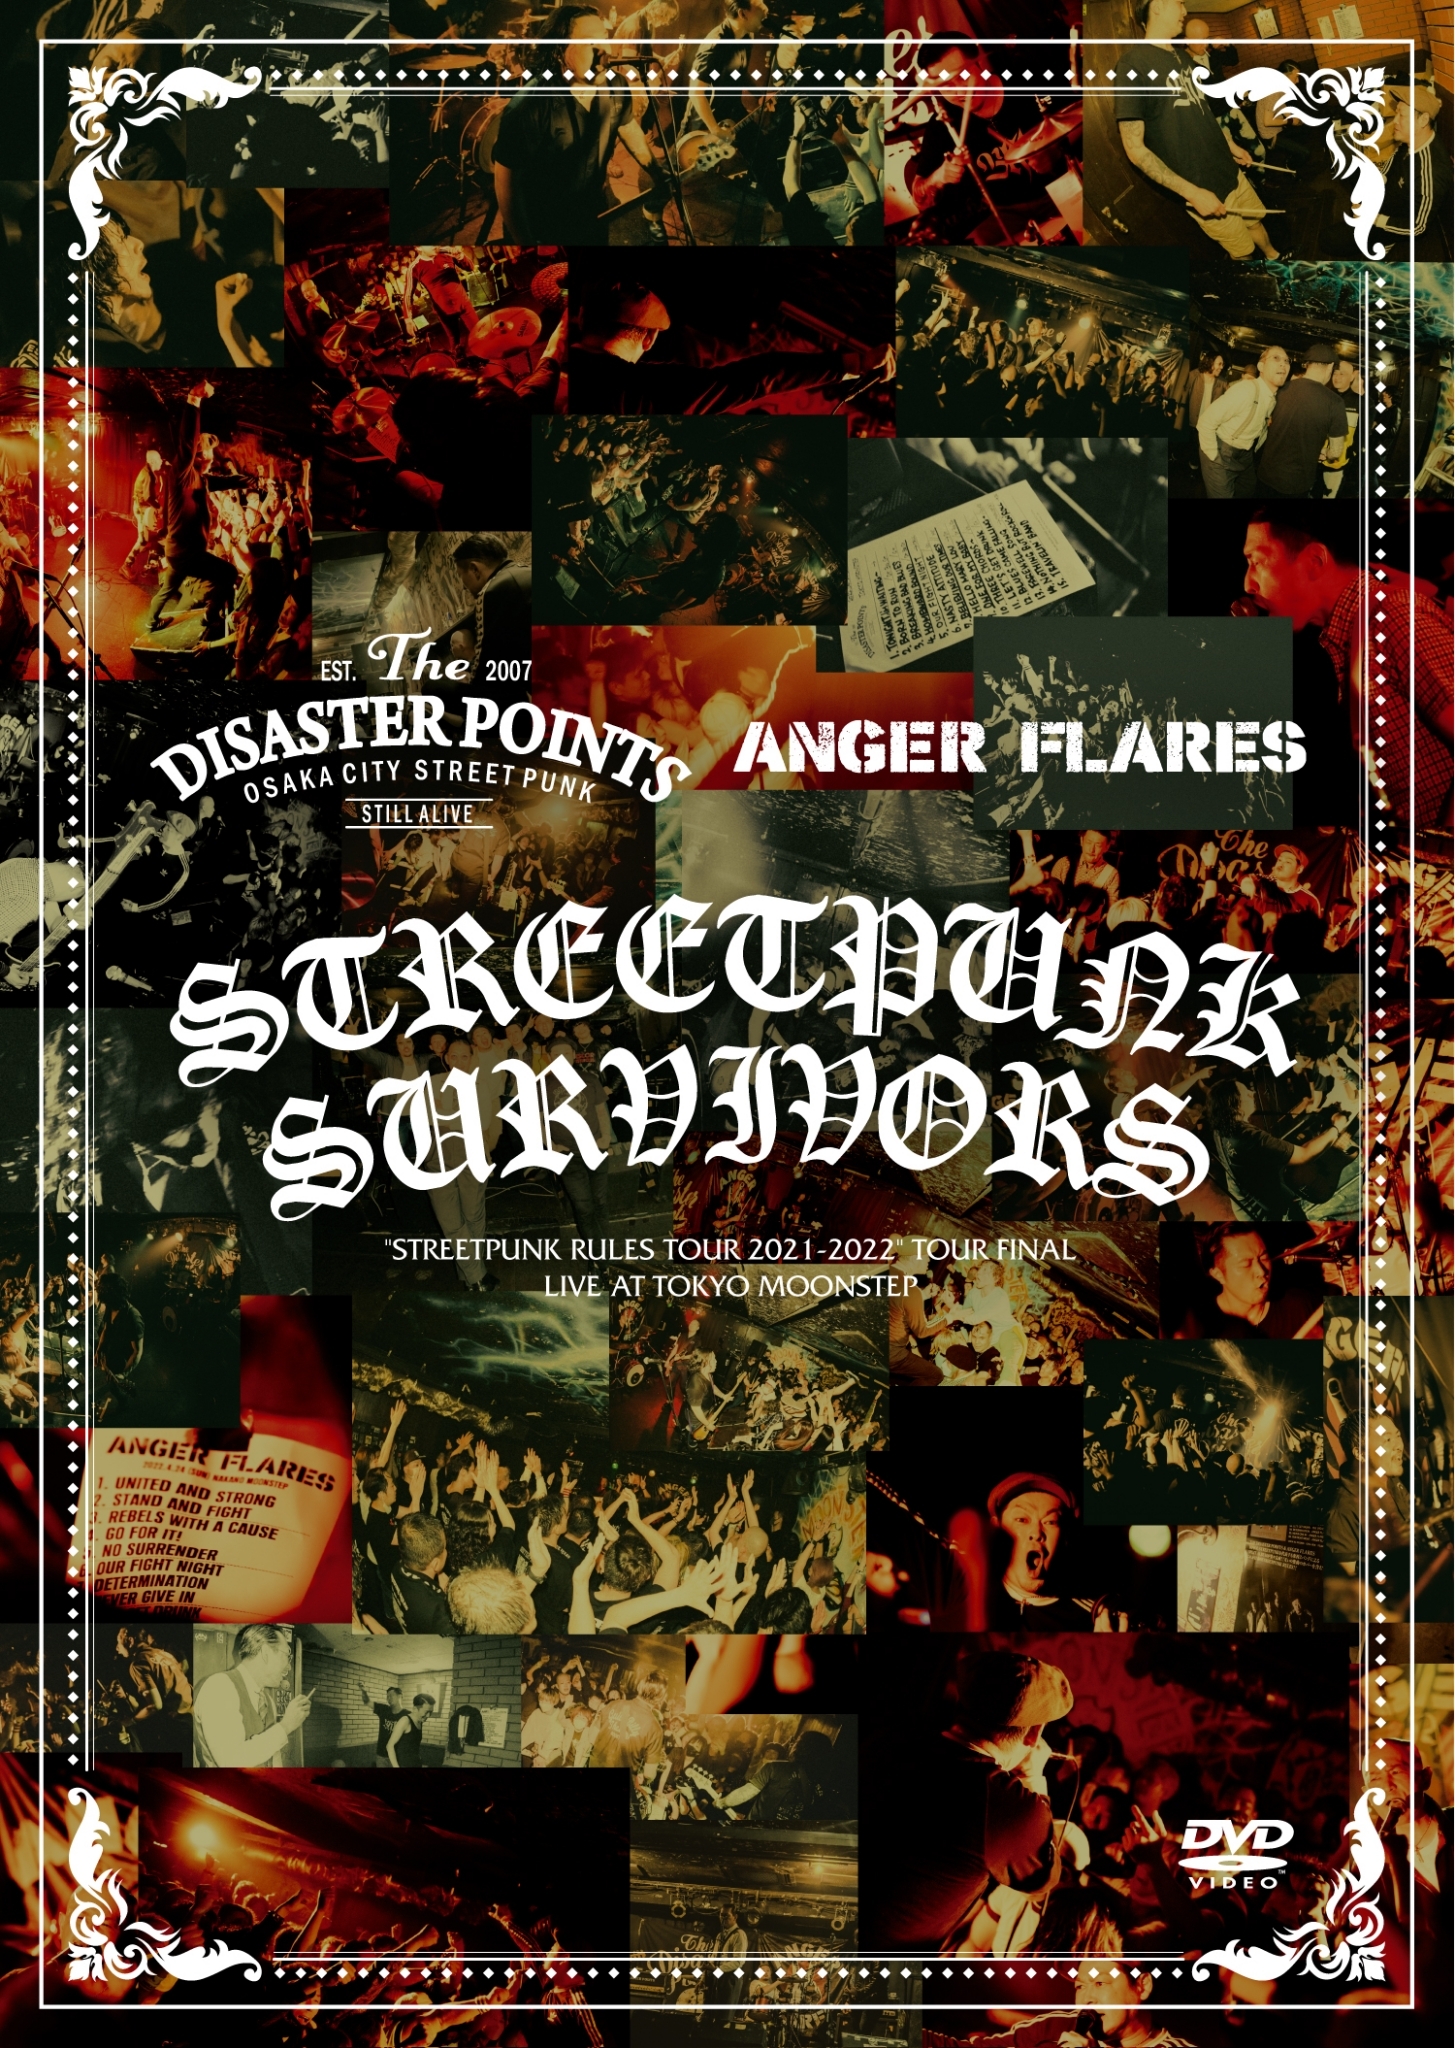 THE DISASTER POINTS & ANGER FLARES / STREETPUNK SURVIVORS